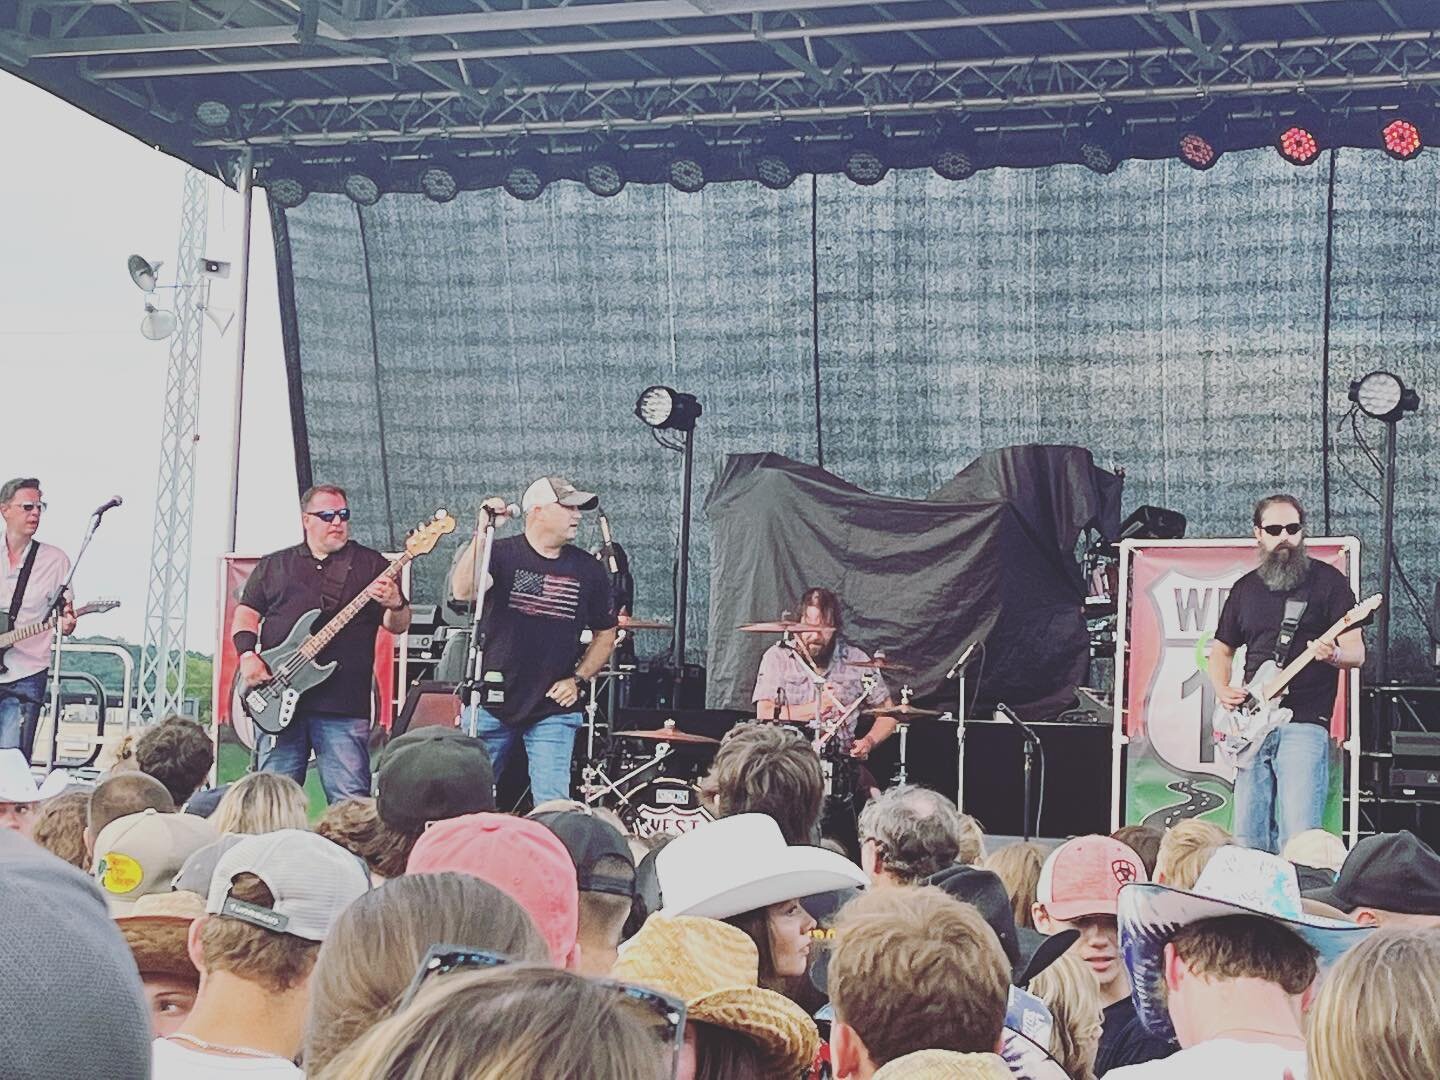 Wow! What an amazing night at the Sauk County Fair!! Thank you so much to @dylanscottcountry for letting us share the stage with him and also thanks to @saukfair for having us back again this year! An even bigger thanks to everyone out there that cam